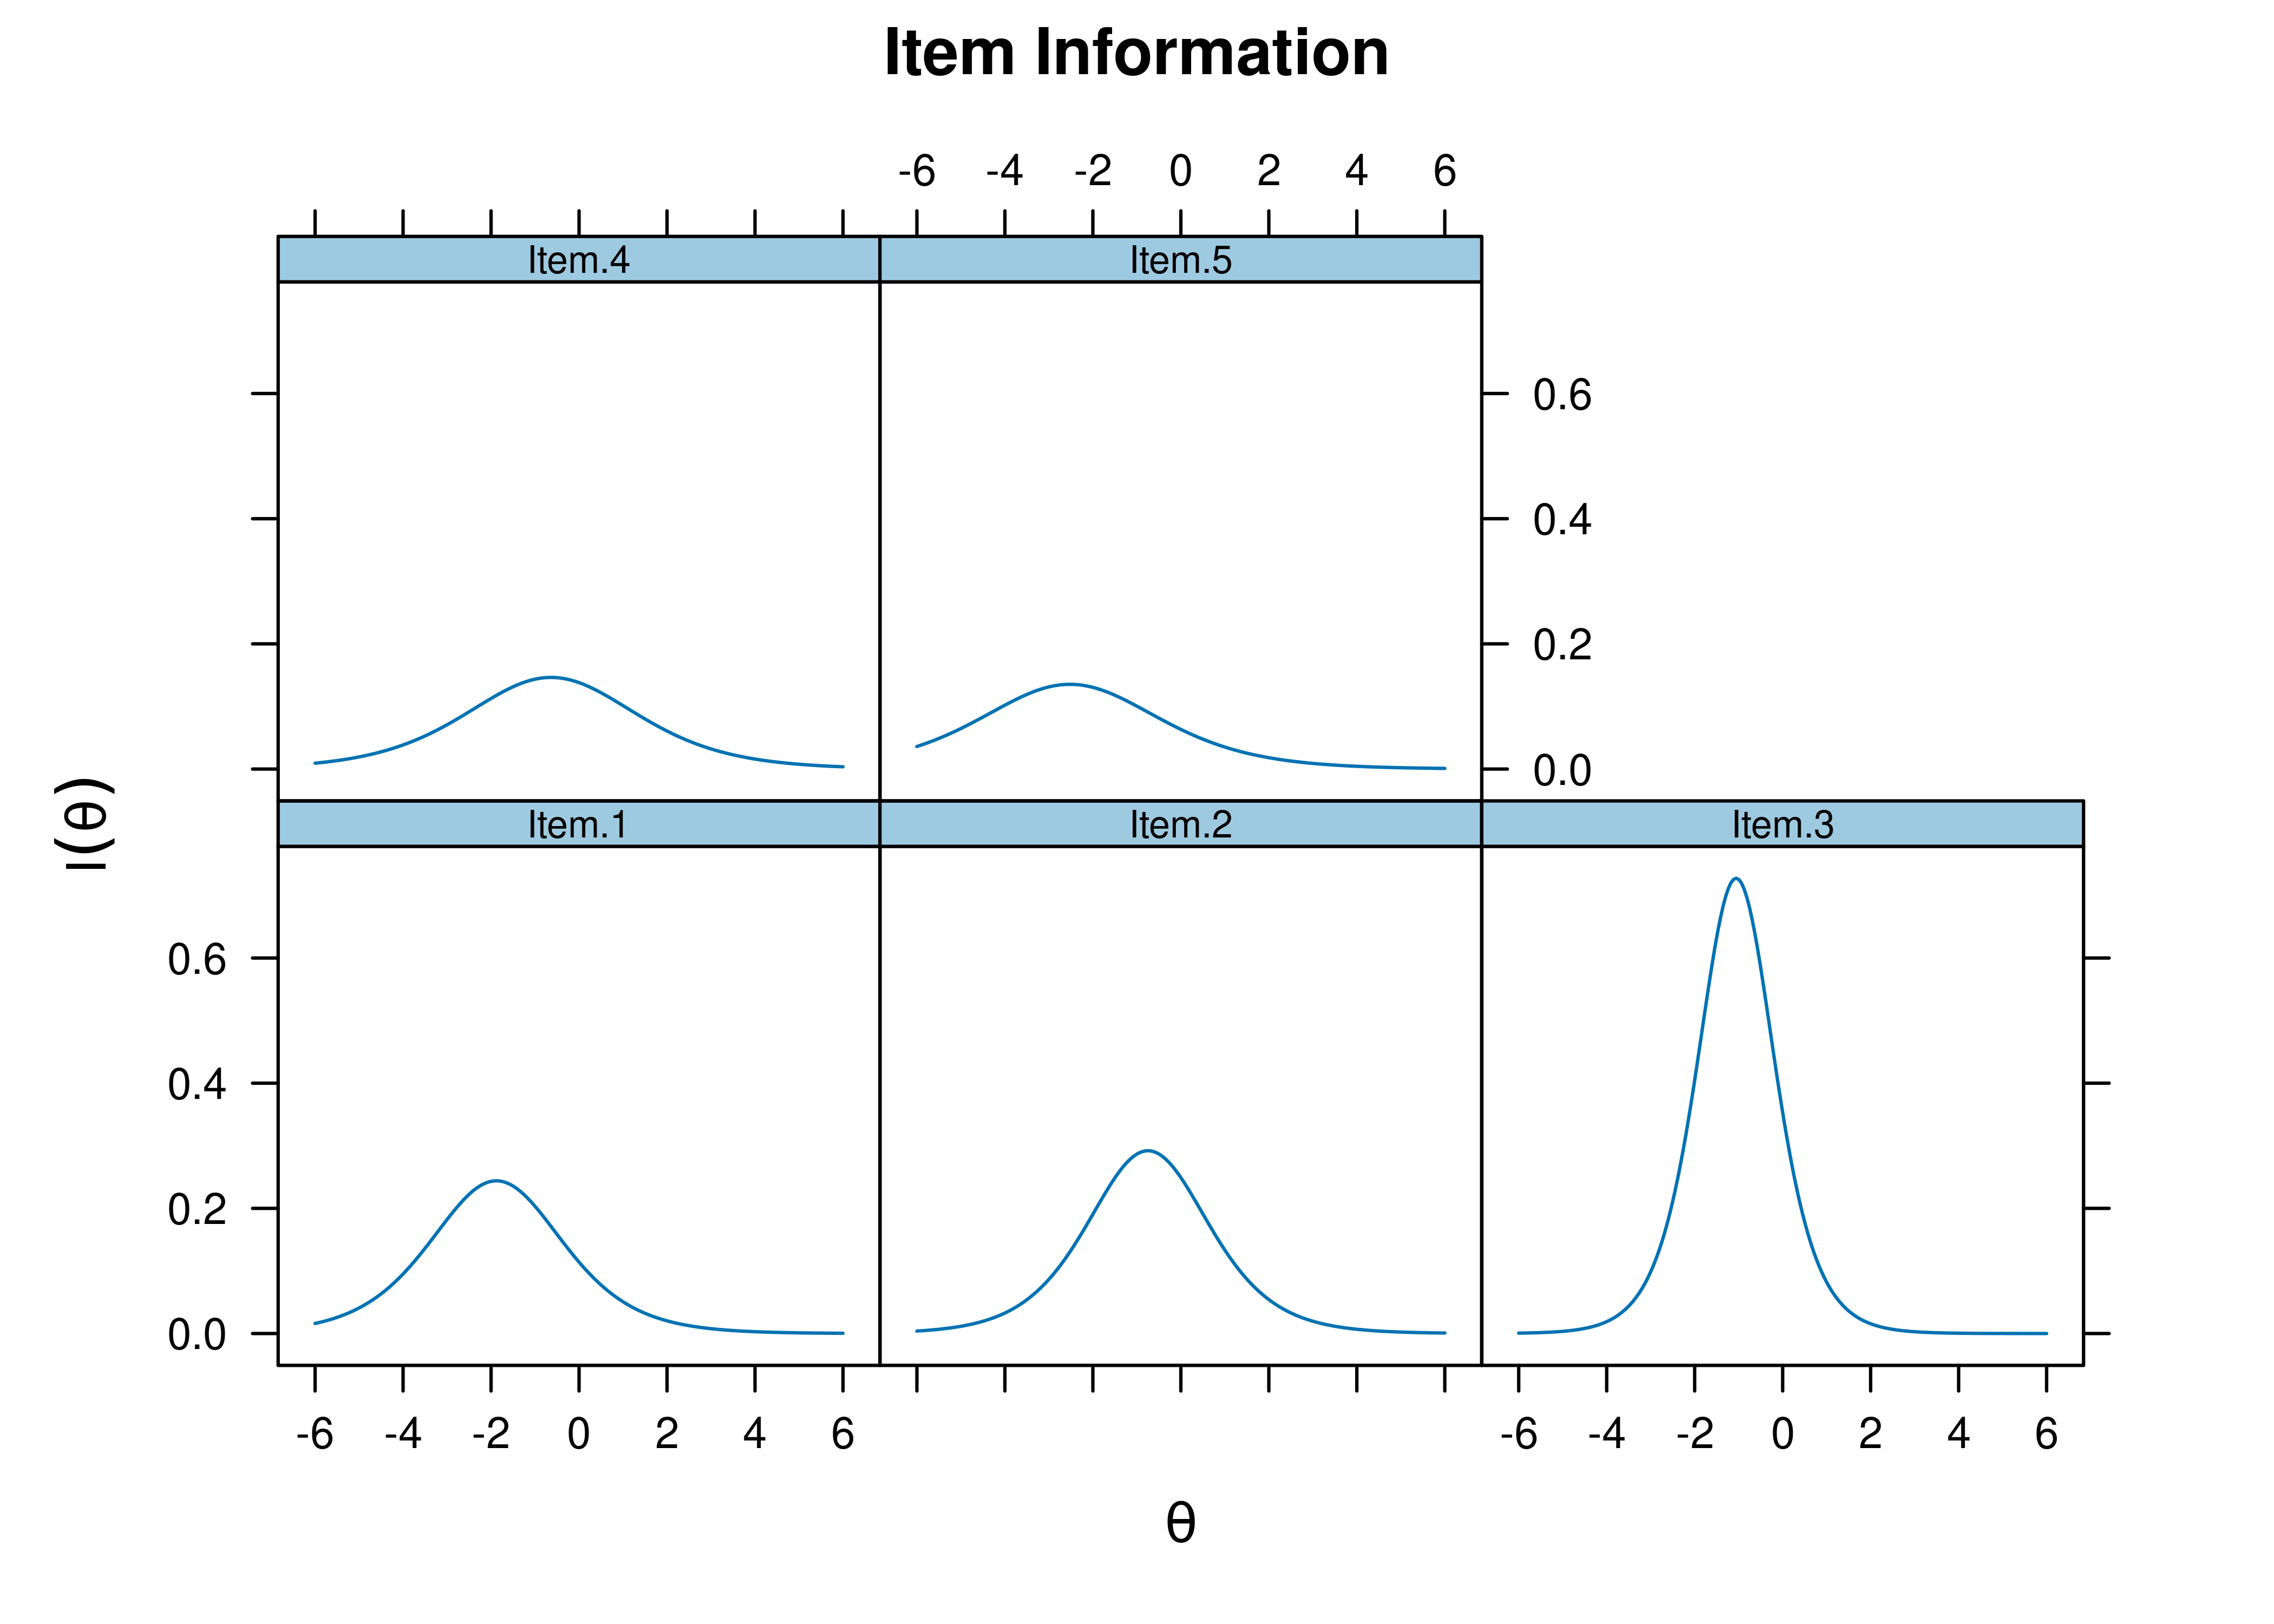 Item Information Curves From Two-Parameter Logistic Item Response Theory Model.